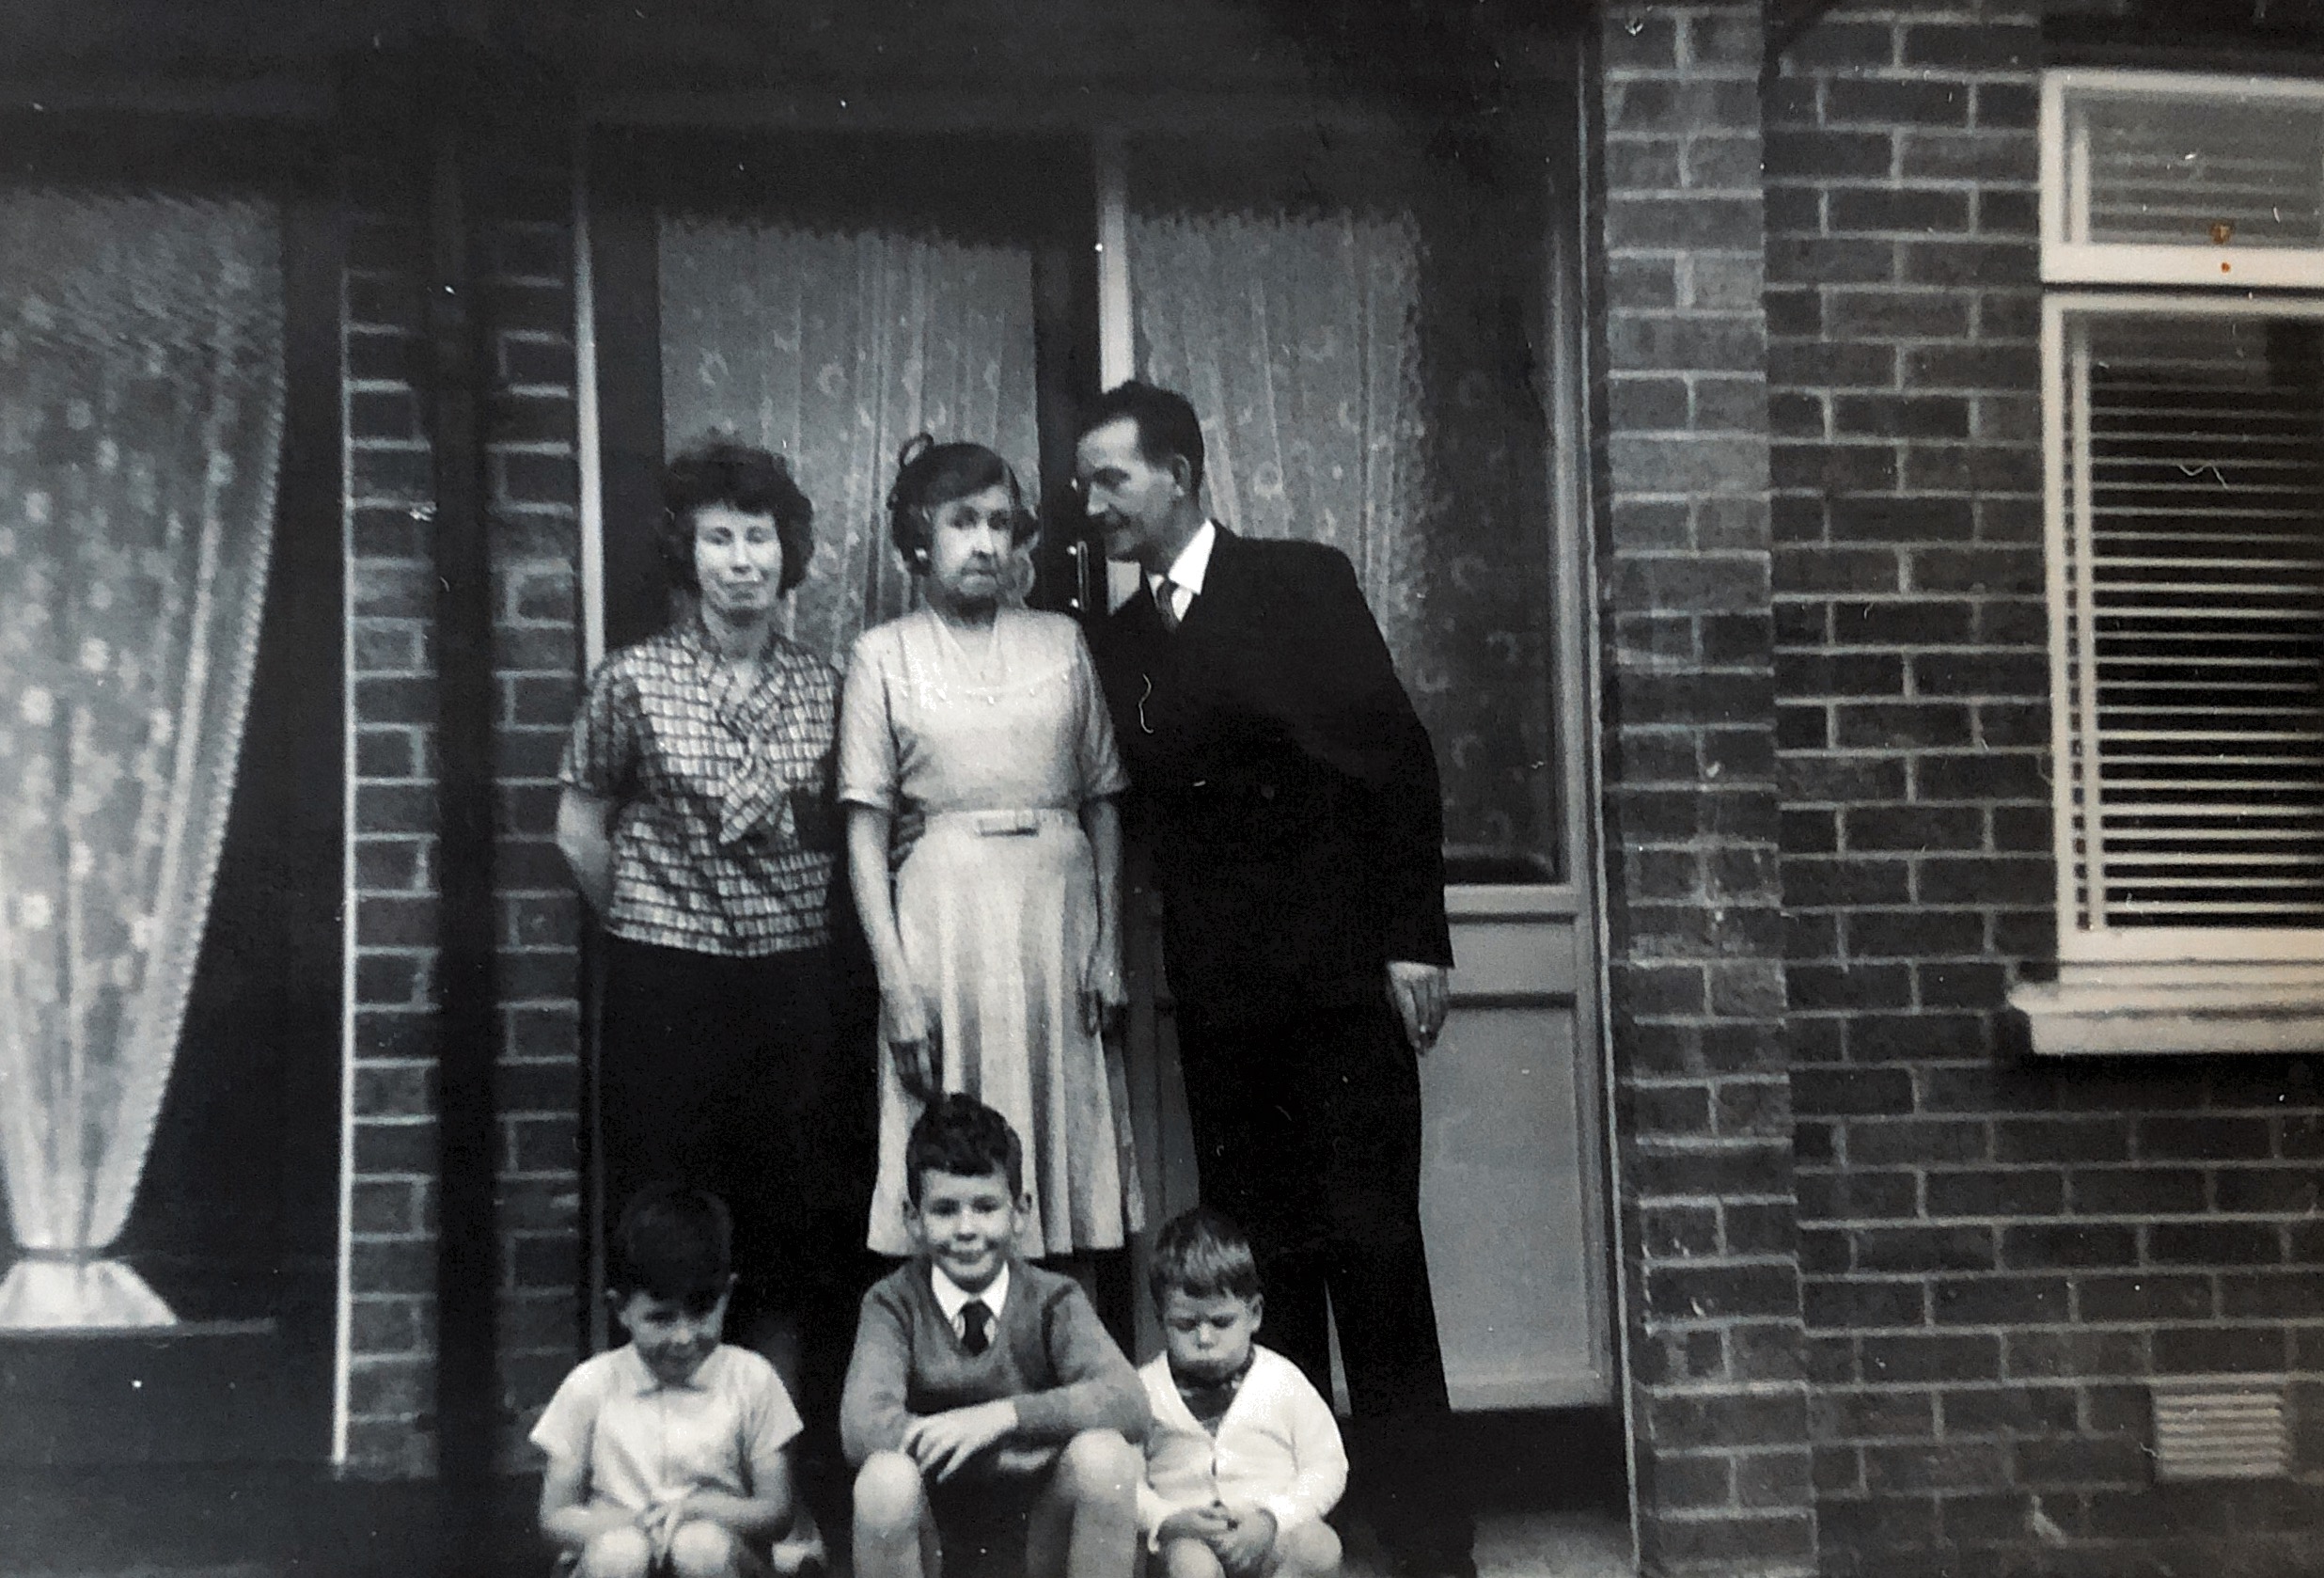 Circa 1961 Belfast, Northern Ireland - At Aunt Theresa Best (Nee Delaney) house with Grandma Delaney (Mary Ann McConville), Thomas Alfred Delaney, ??, James Peter Delaney, Kenneth Delaney.